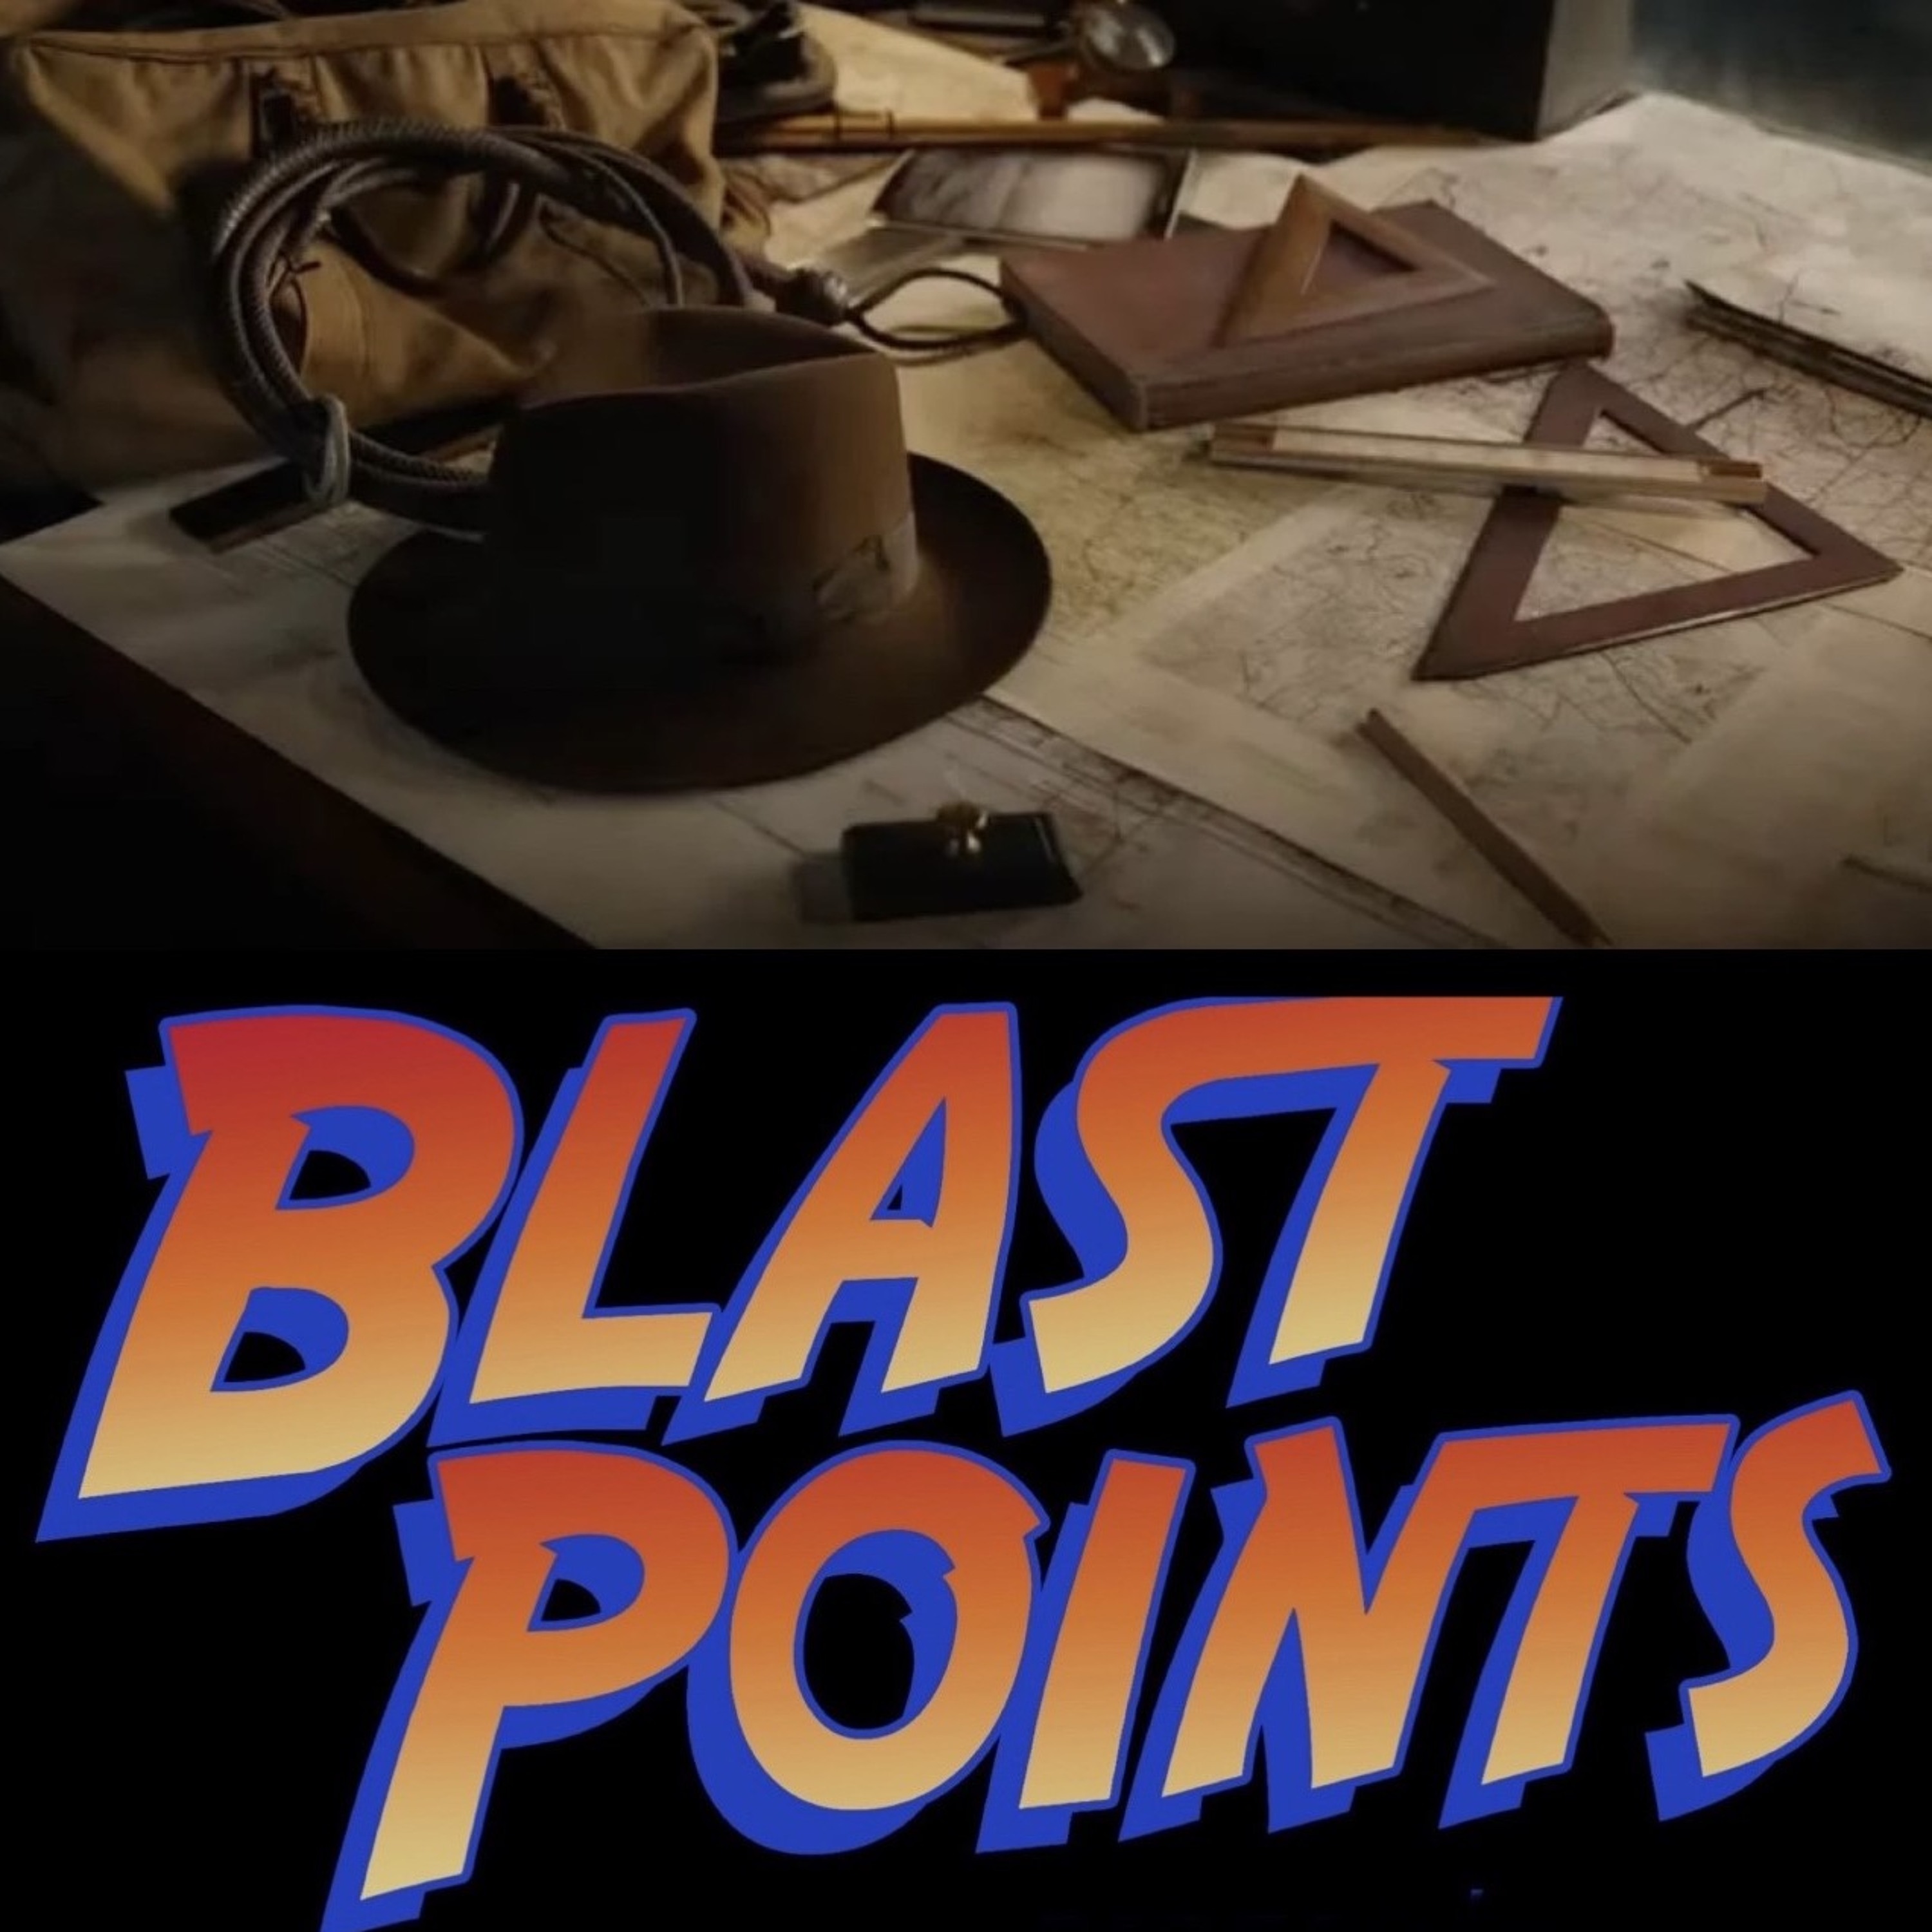 INDIANA JONES AND THE DIAL OF DESTINY TRAILER FREAKOUT